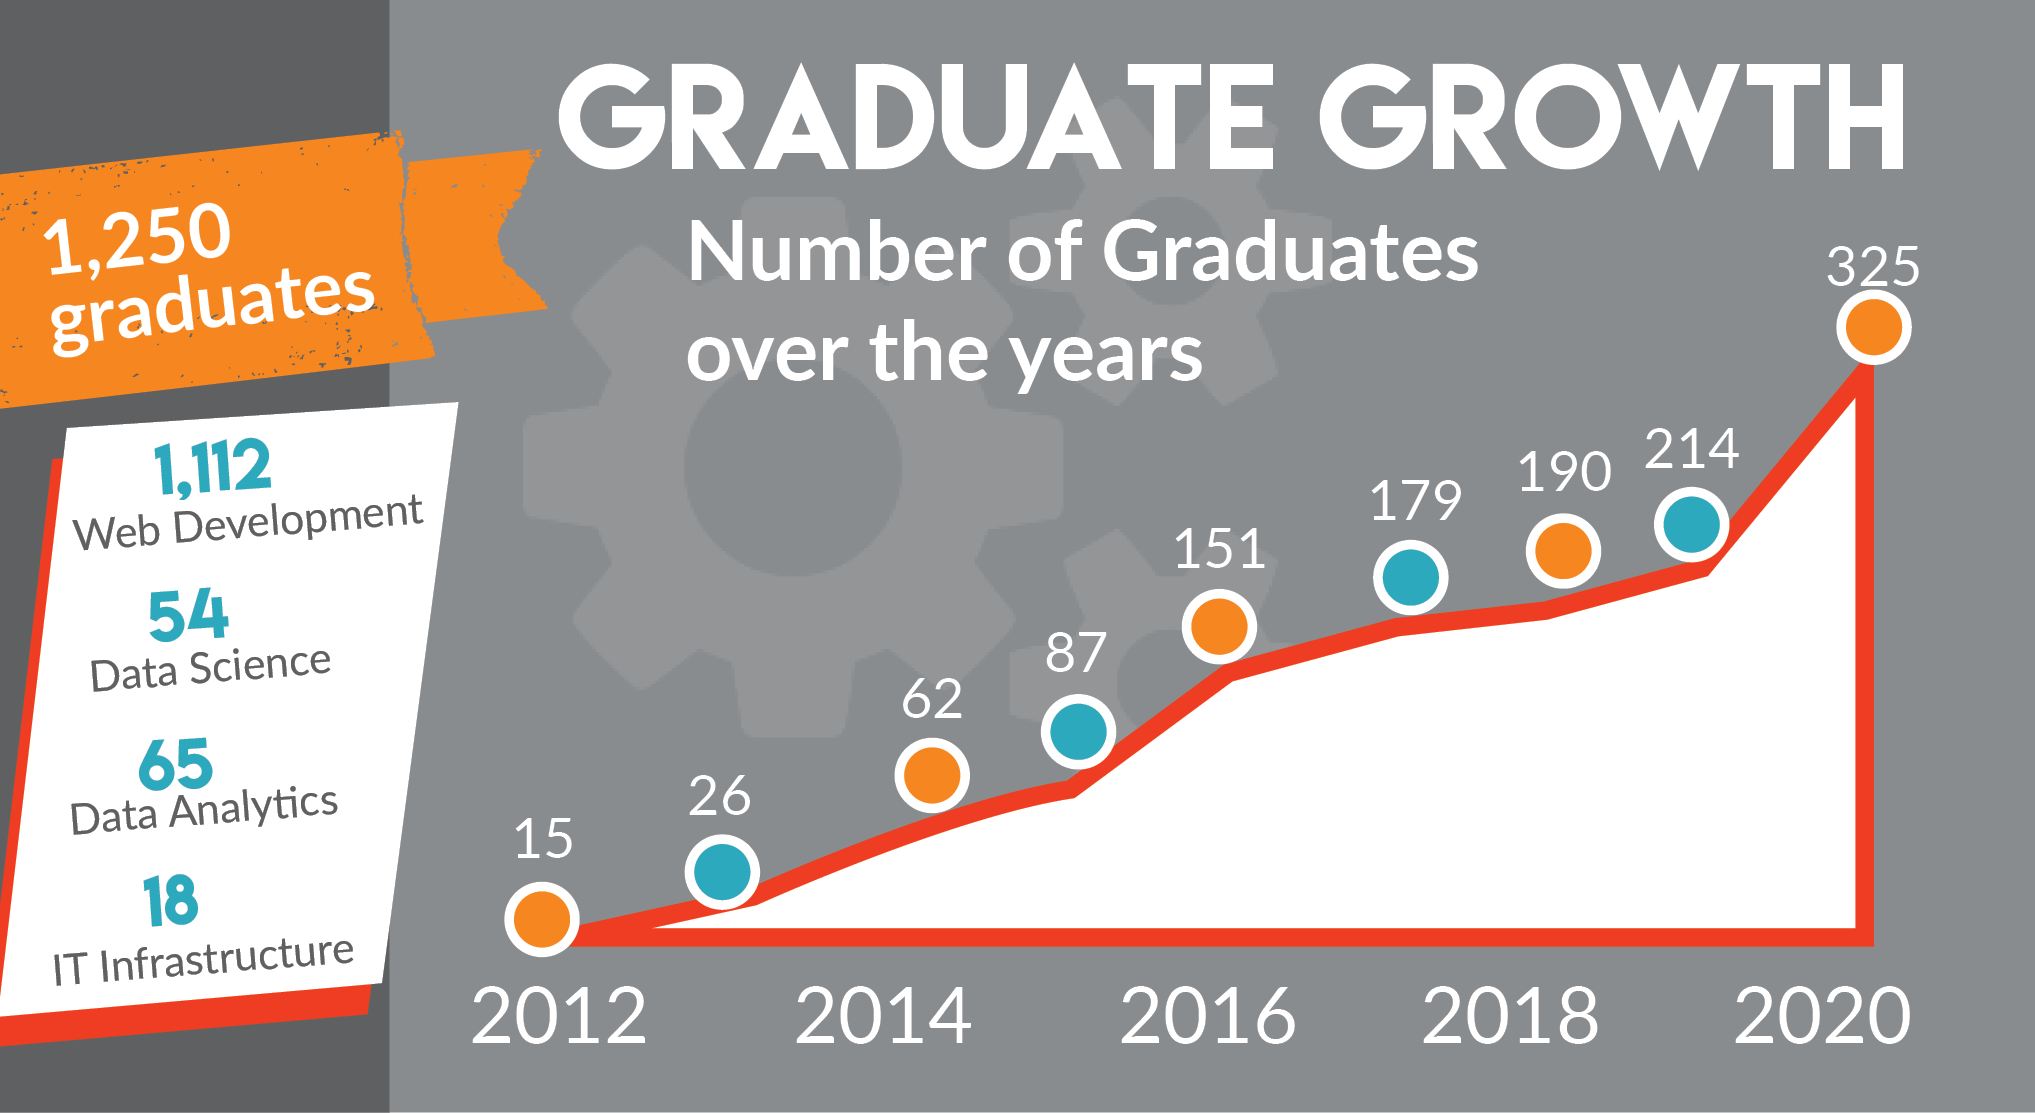 Graduate Growth - from 15 graduates in 2012 to 325 graduates in 2020, NSS has graduated 1250 students